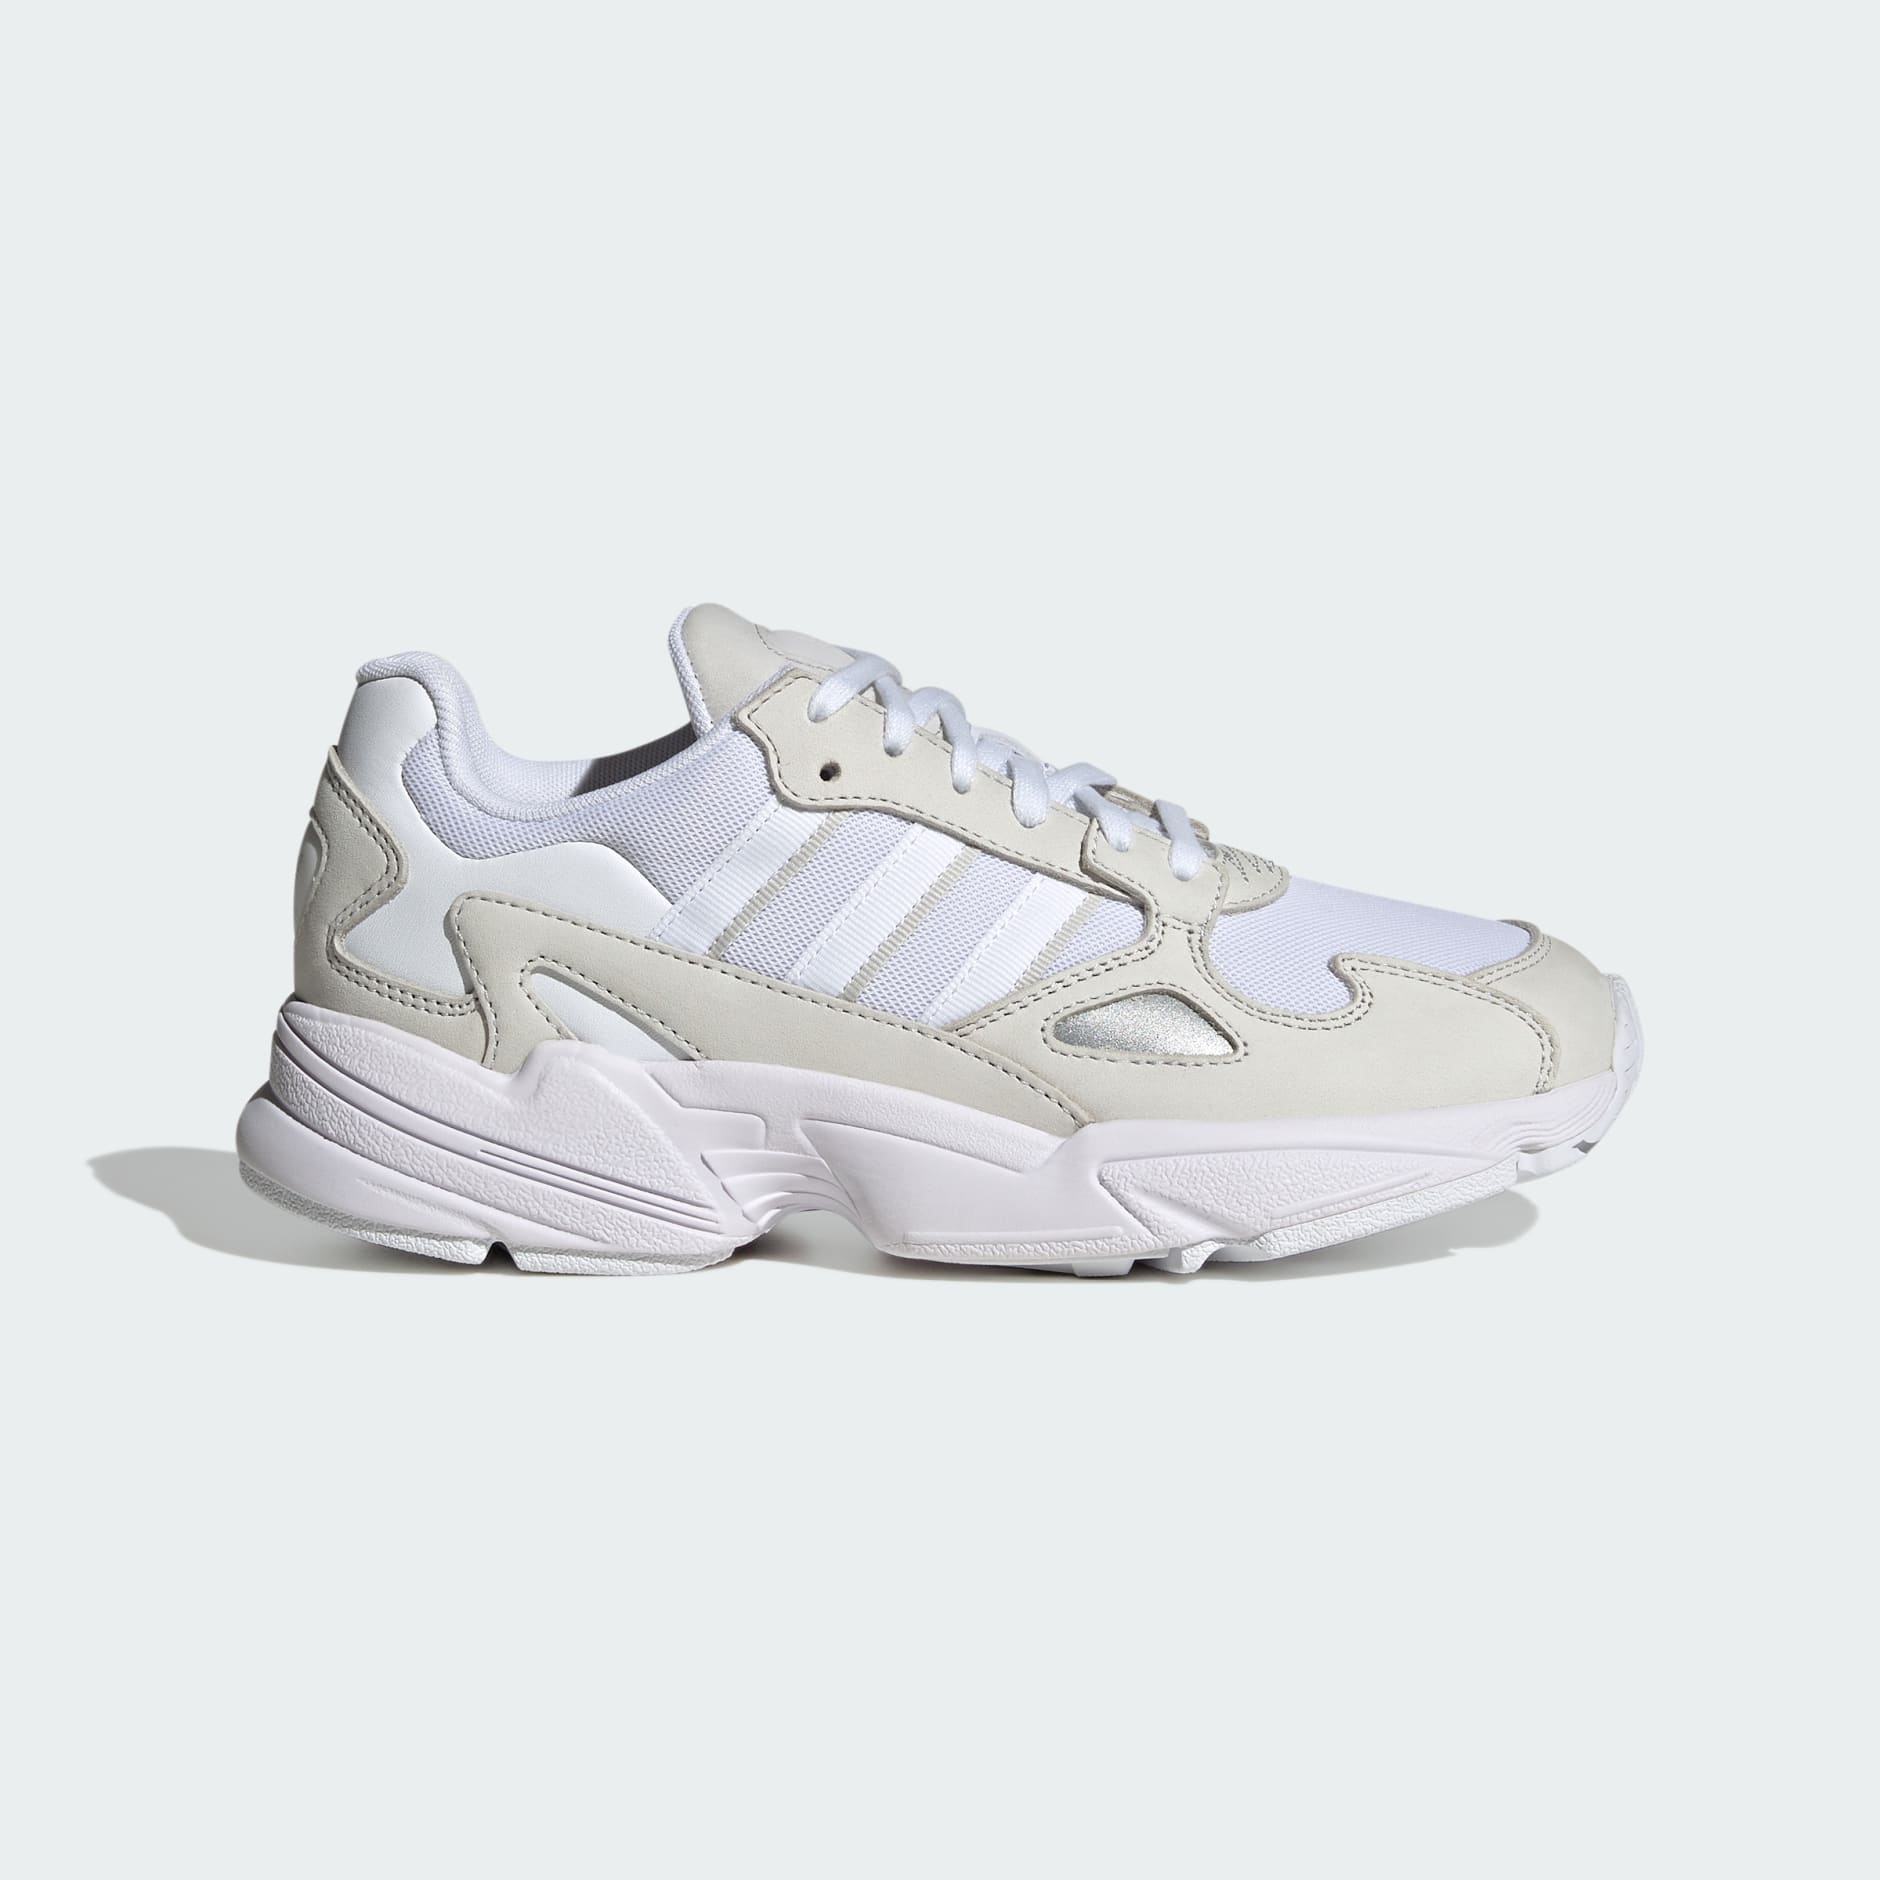 Shoes - Falcon Shoes - White | adidas South Africa